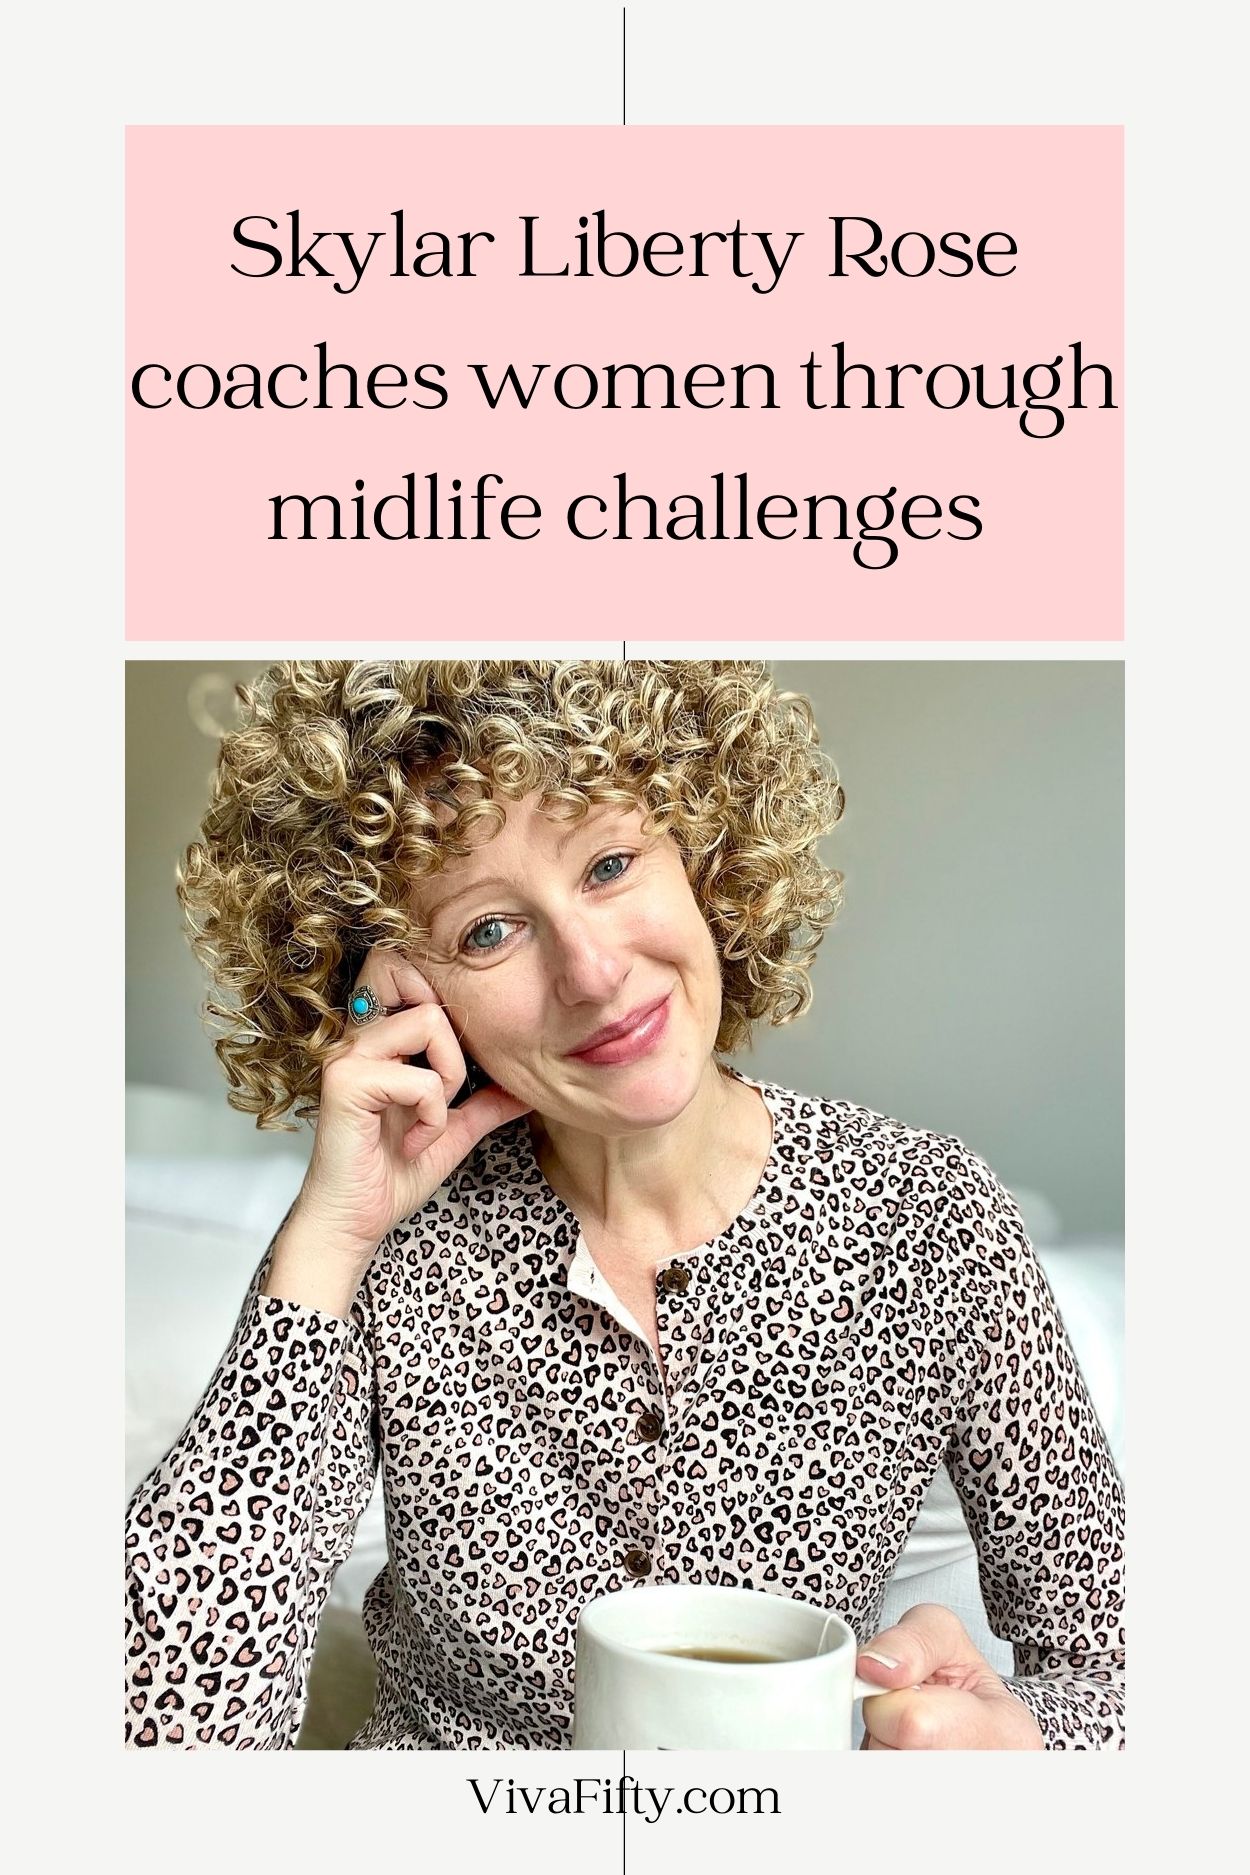 Midlife is rife with change and uncertainty, and Skylar Liberty Rose helps women navigate these years mindfully and with joy.